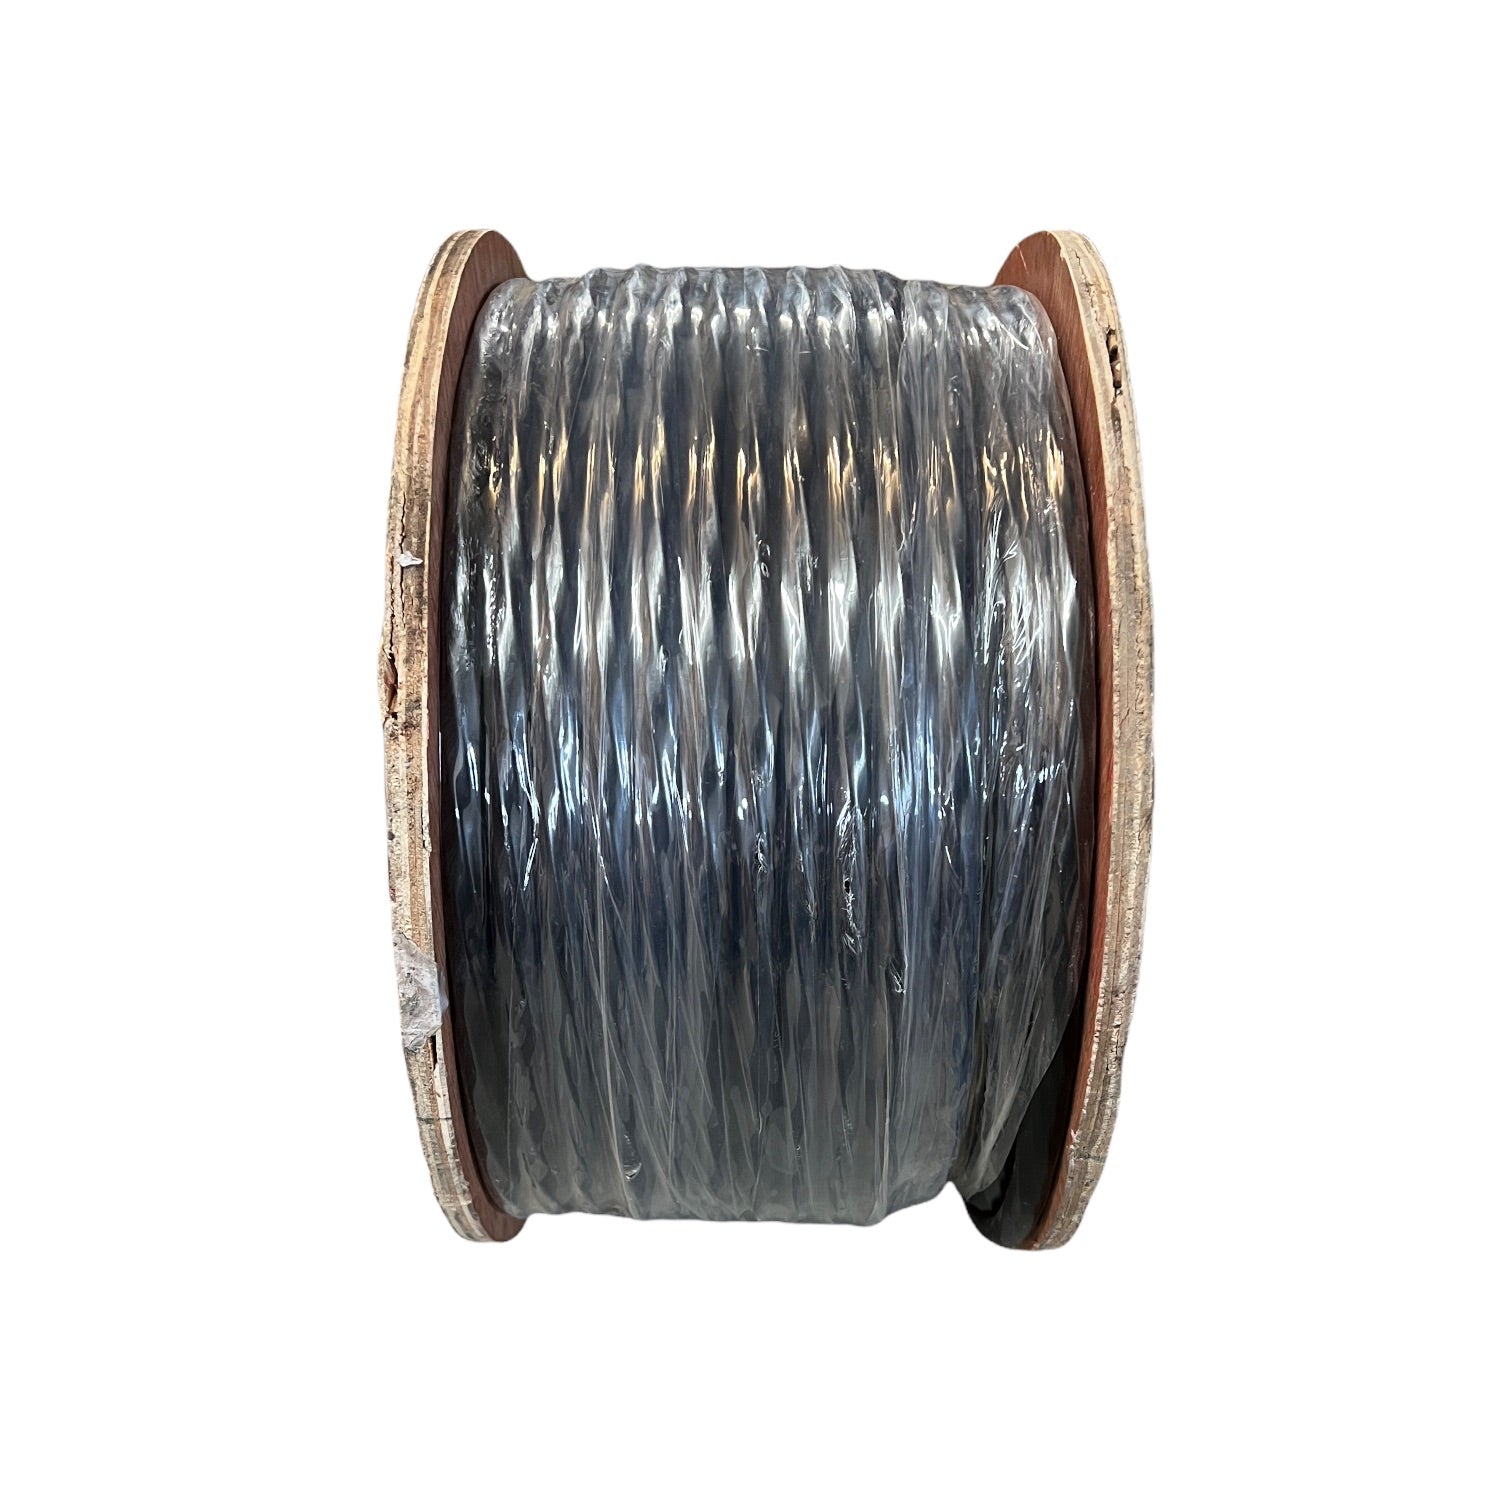 18/13X1000 - Multi-Conductor Irrigation Control Wire, 18 awg, 18/13 X 1000 ft